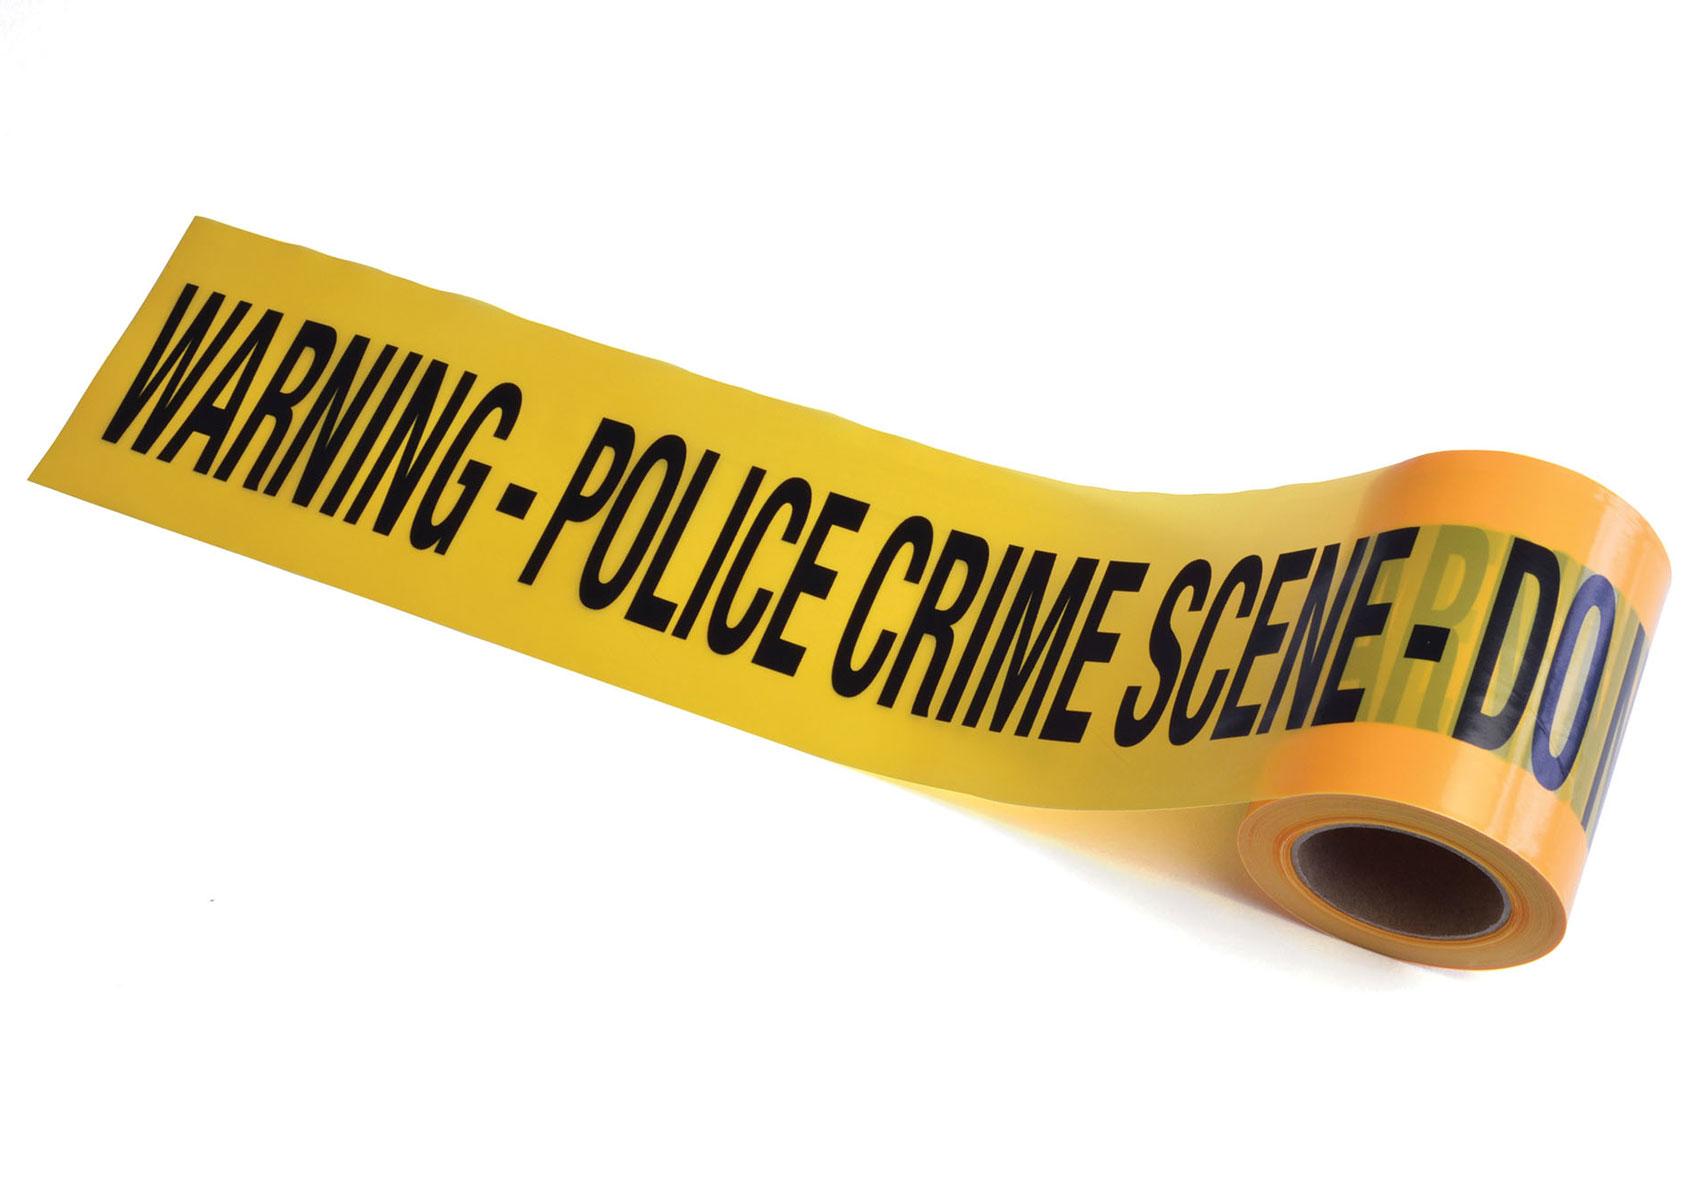 Warning Police Crime Scene Barricade Tape - 30m by Bristol Novelties GJ439 available here at Karnival Costumes online party shop